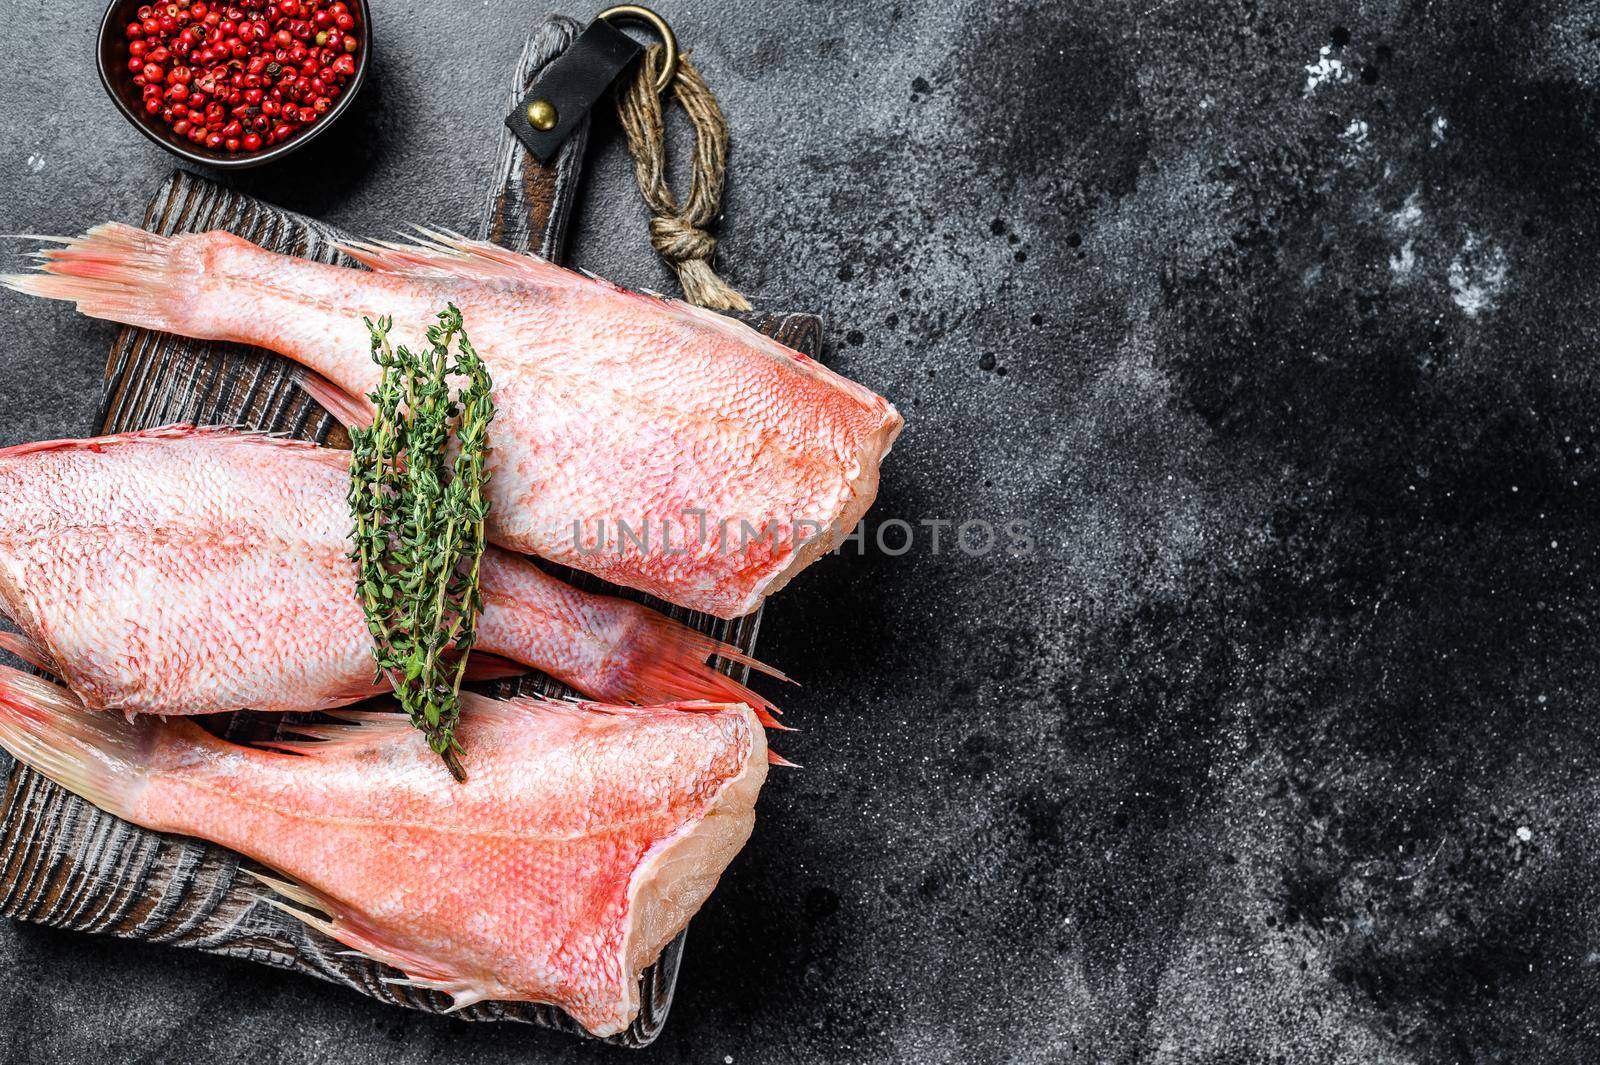 Whole raw red snapper fish on a cutting board. Black background. Top view. Copy space.